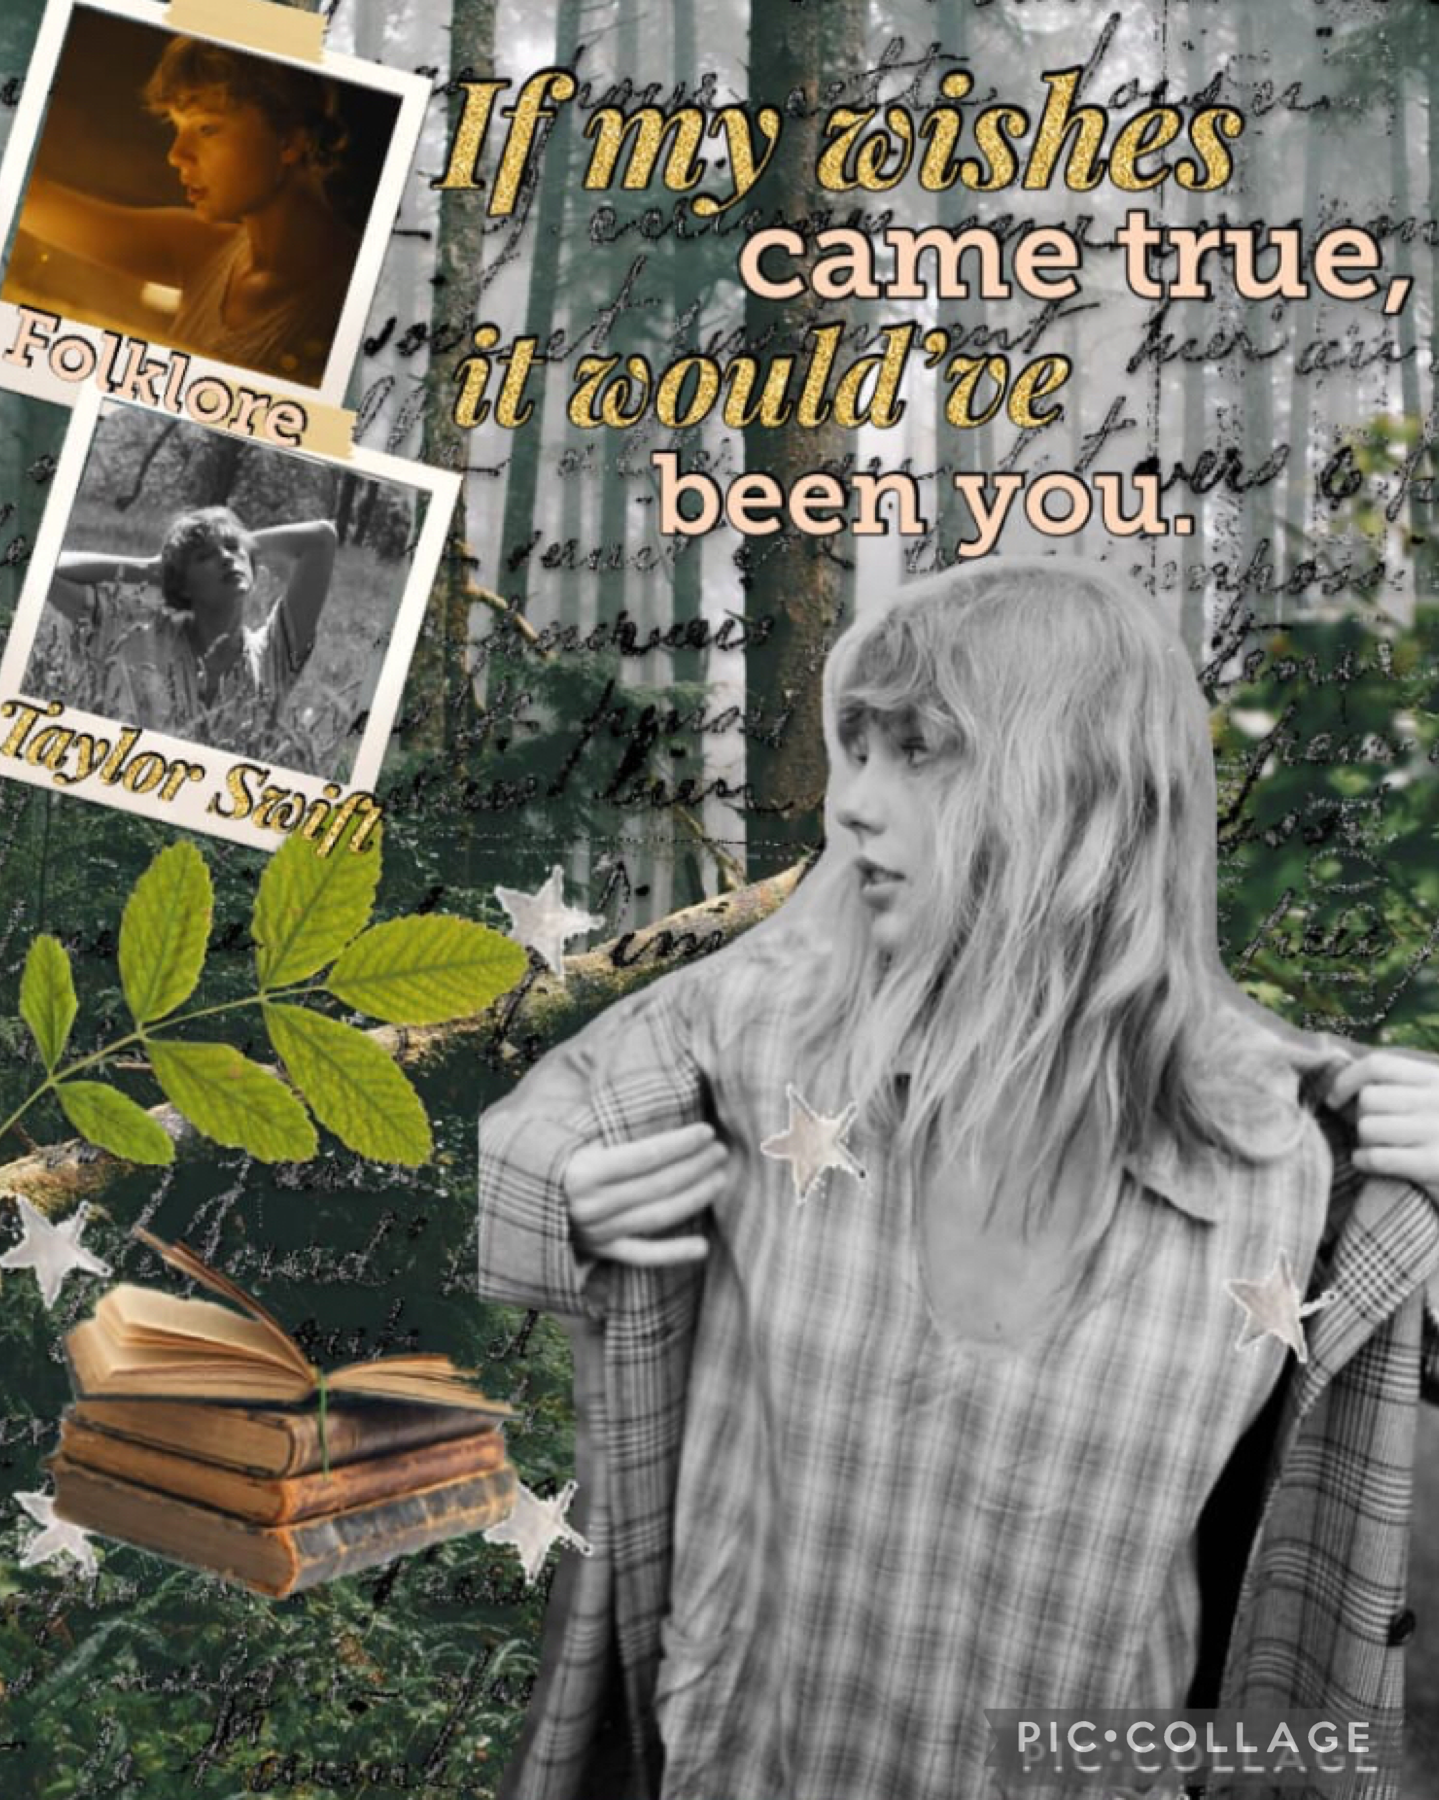 11.5.22 Folklore Taylor Swift aesthetic collage and my entry to watermelonsugarvol6 contest